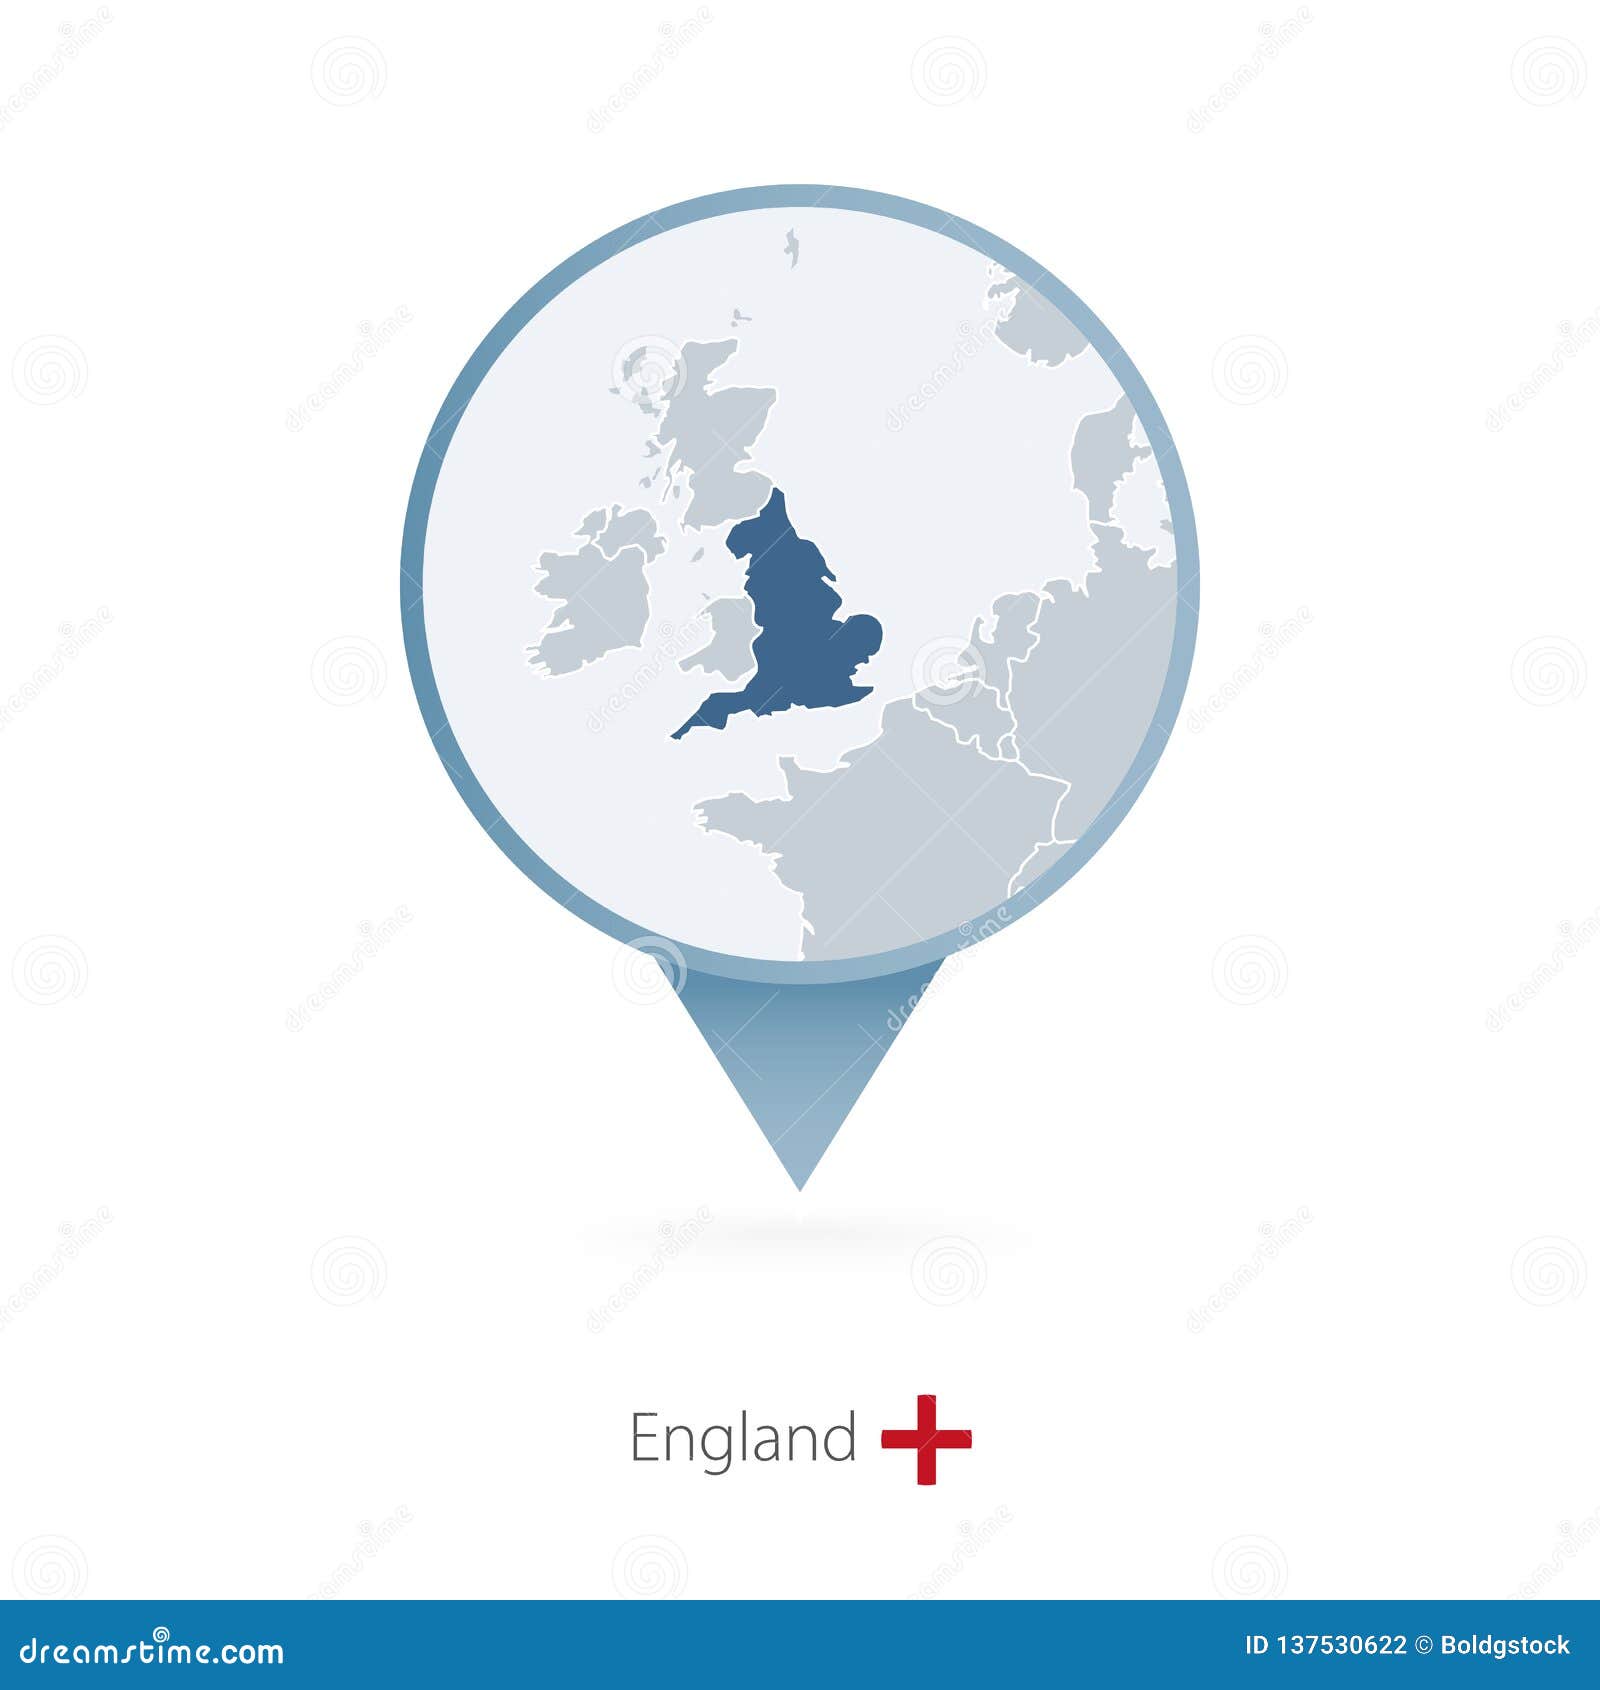 Map Pin With Detailed Map Of England And Neighboring Countries